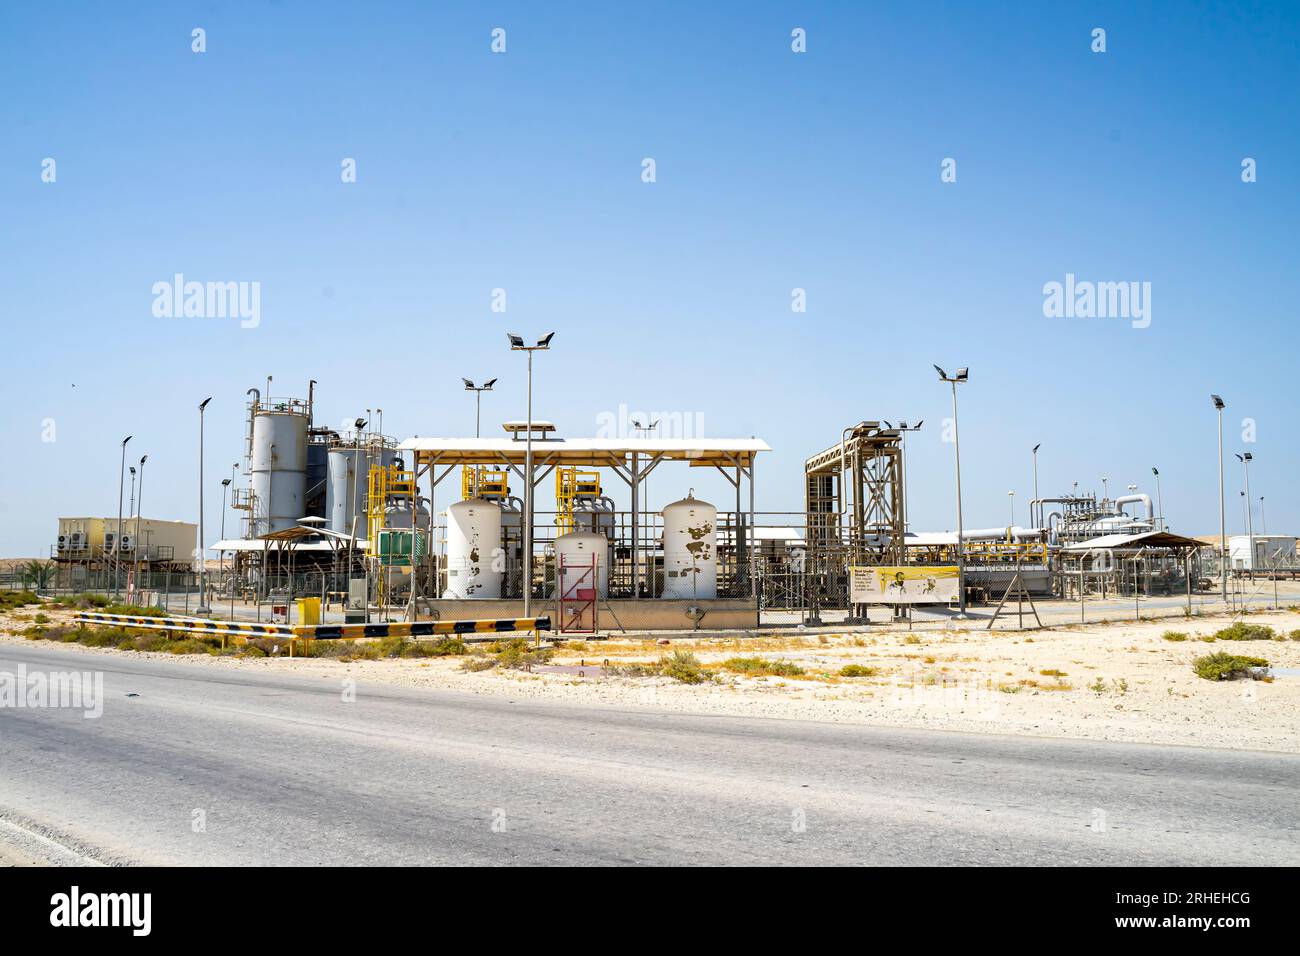 Water treatment plant, oil field in Bahrain. The oil & water treatment plant was manufactured by Tatweer Petroleum in 2012 Stock Photo